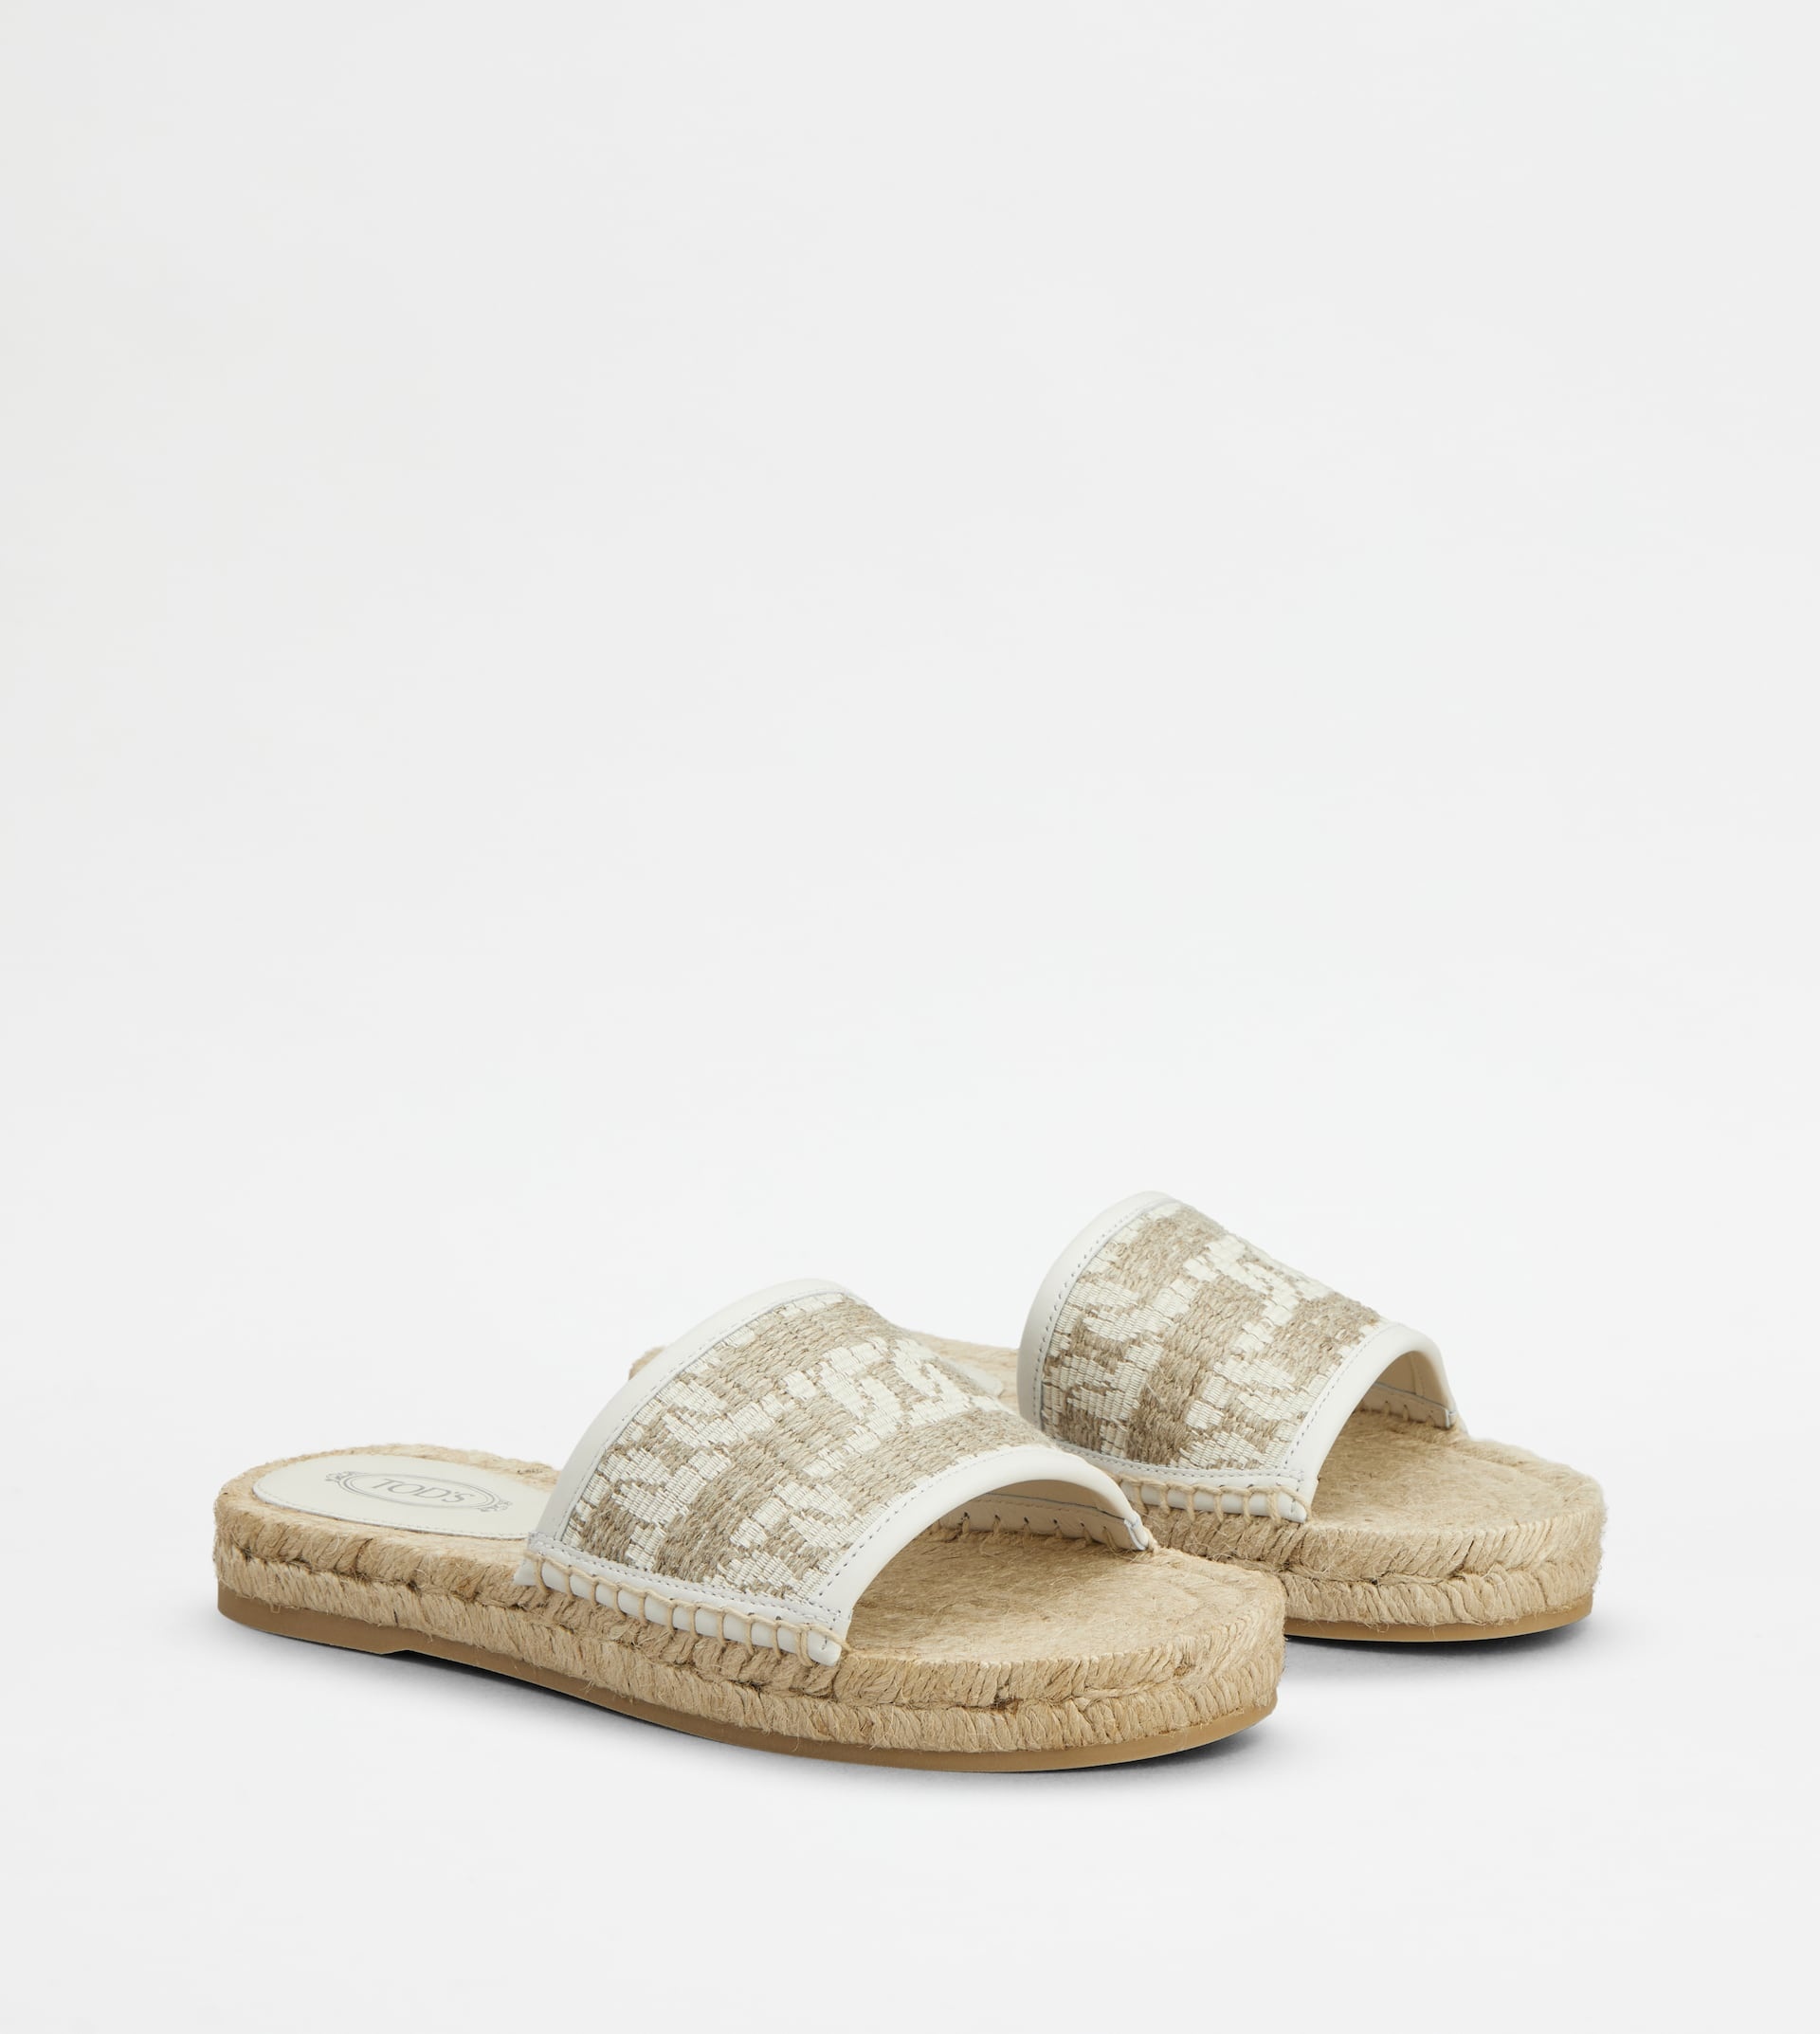 SANDALS IN LEATHER AND FABRIC - OFF WHITE, BEIGE - 3